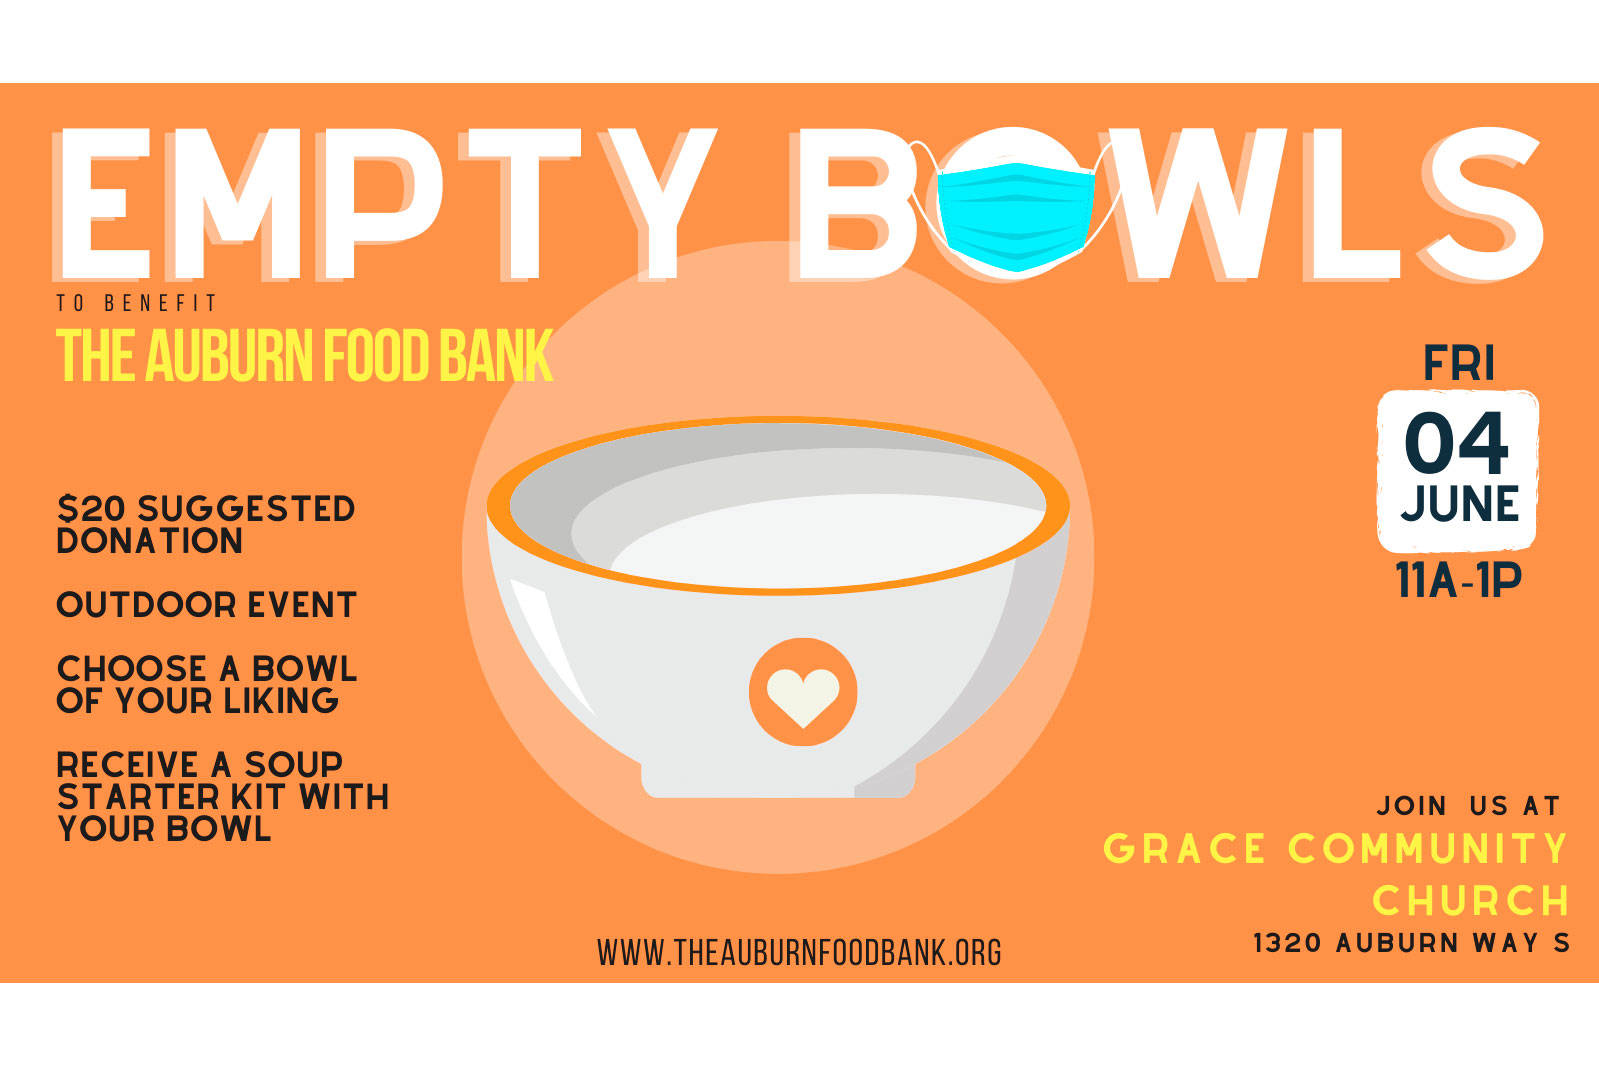 Event promotional graphic courtesy of Auburn Food Bank